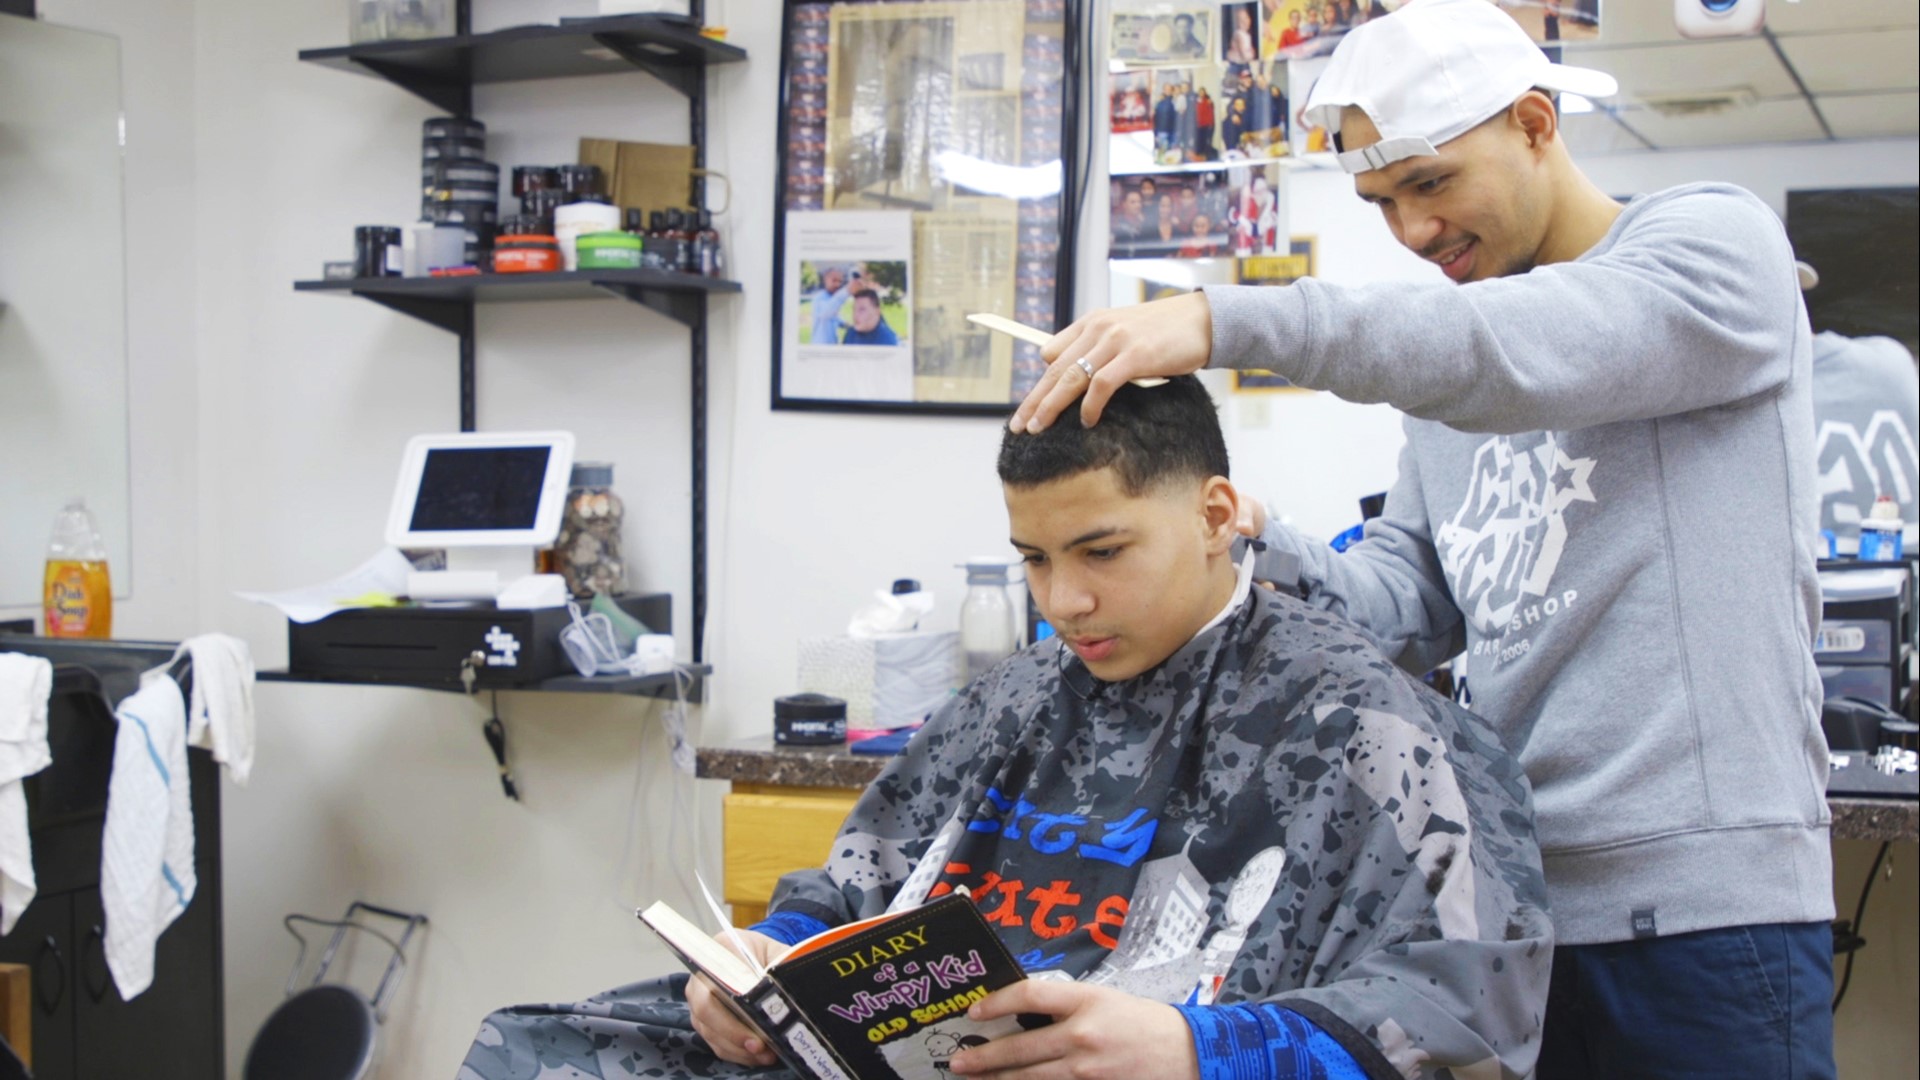 Jon Escueta works to promote literacy and confidence through his "Books By Kids" program at City Cuts barbershop in Kutztown, Pa.